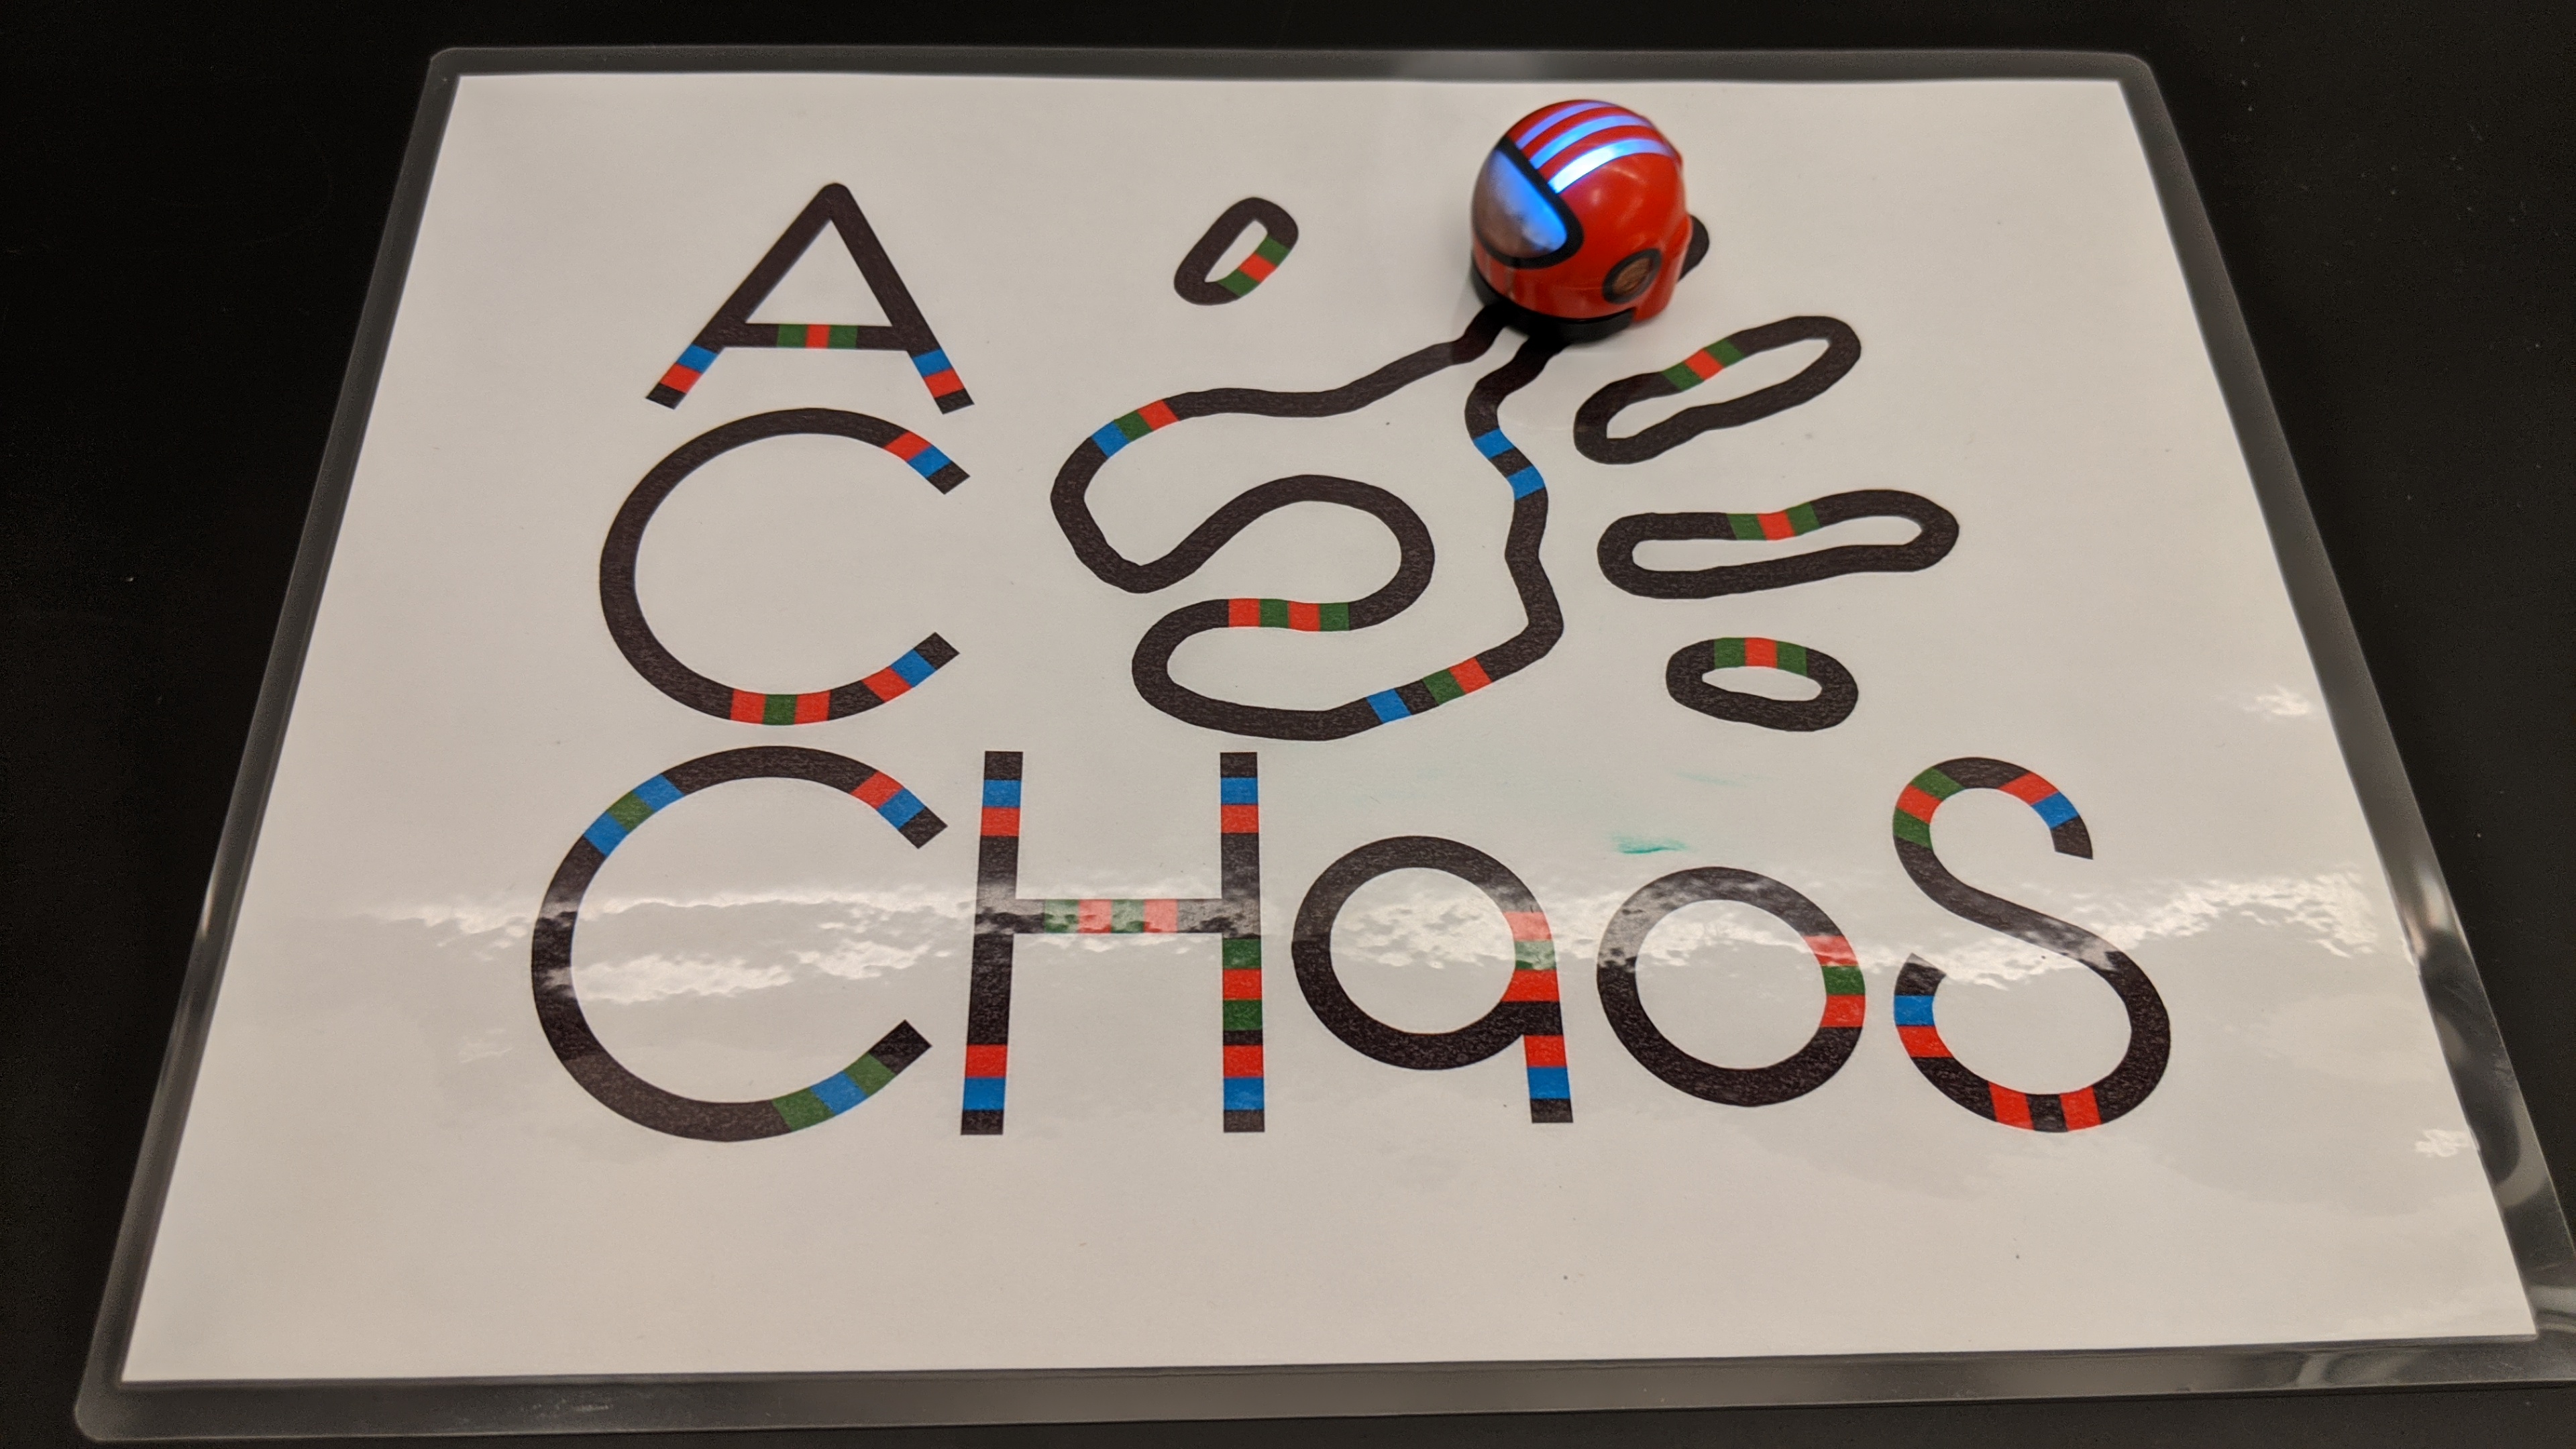 A small spherical robot moves along a picture of the ACCHaoS logo